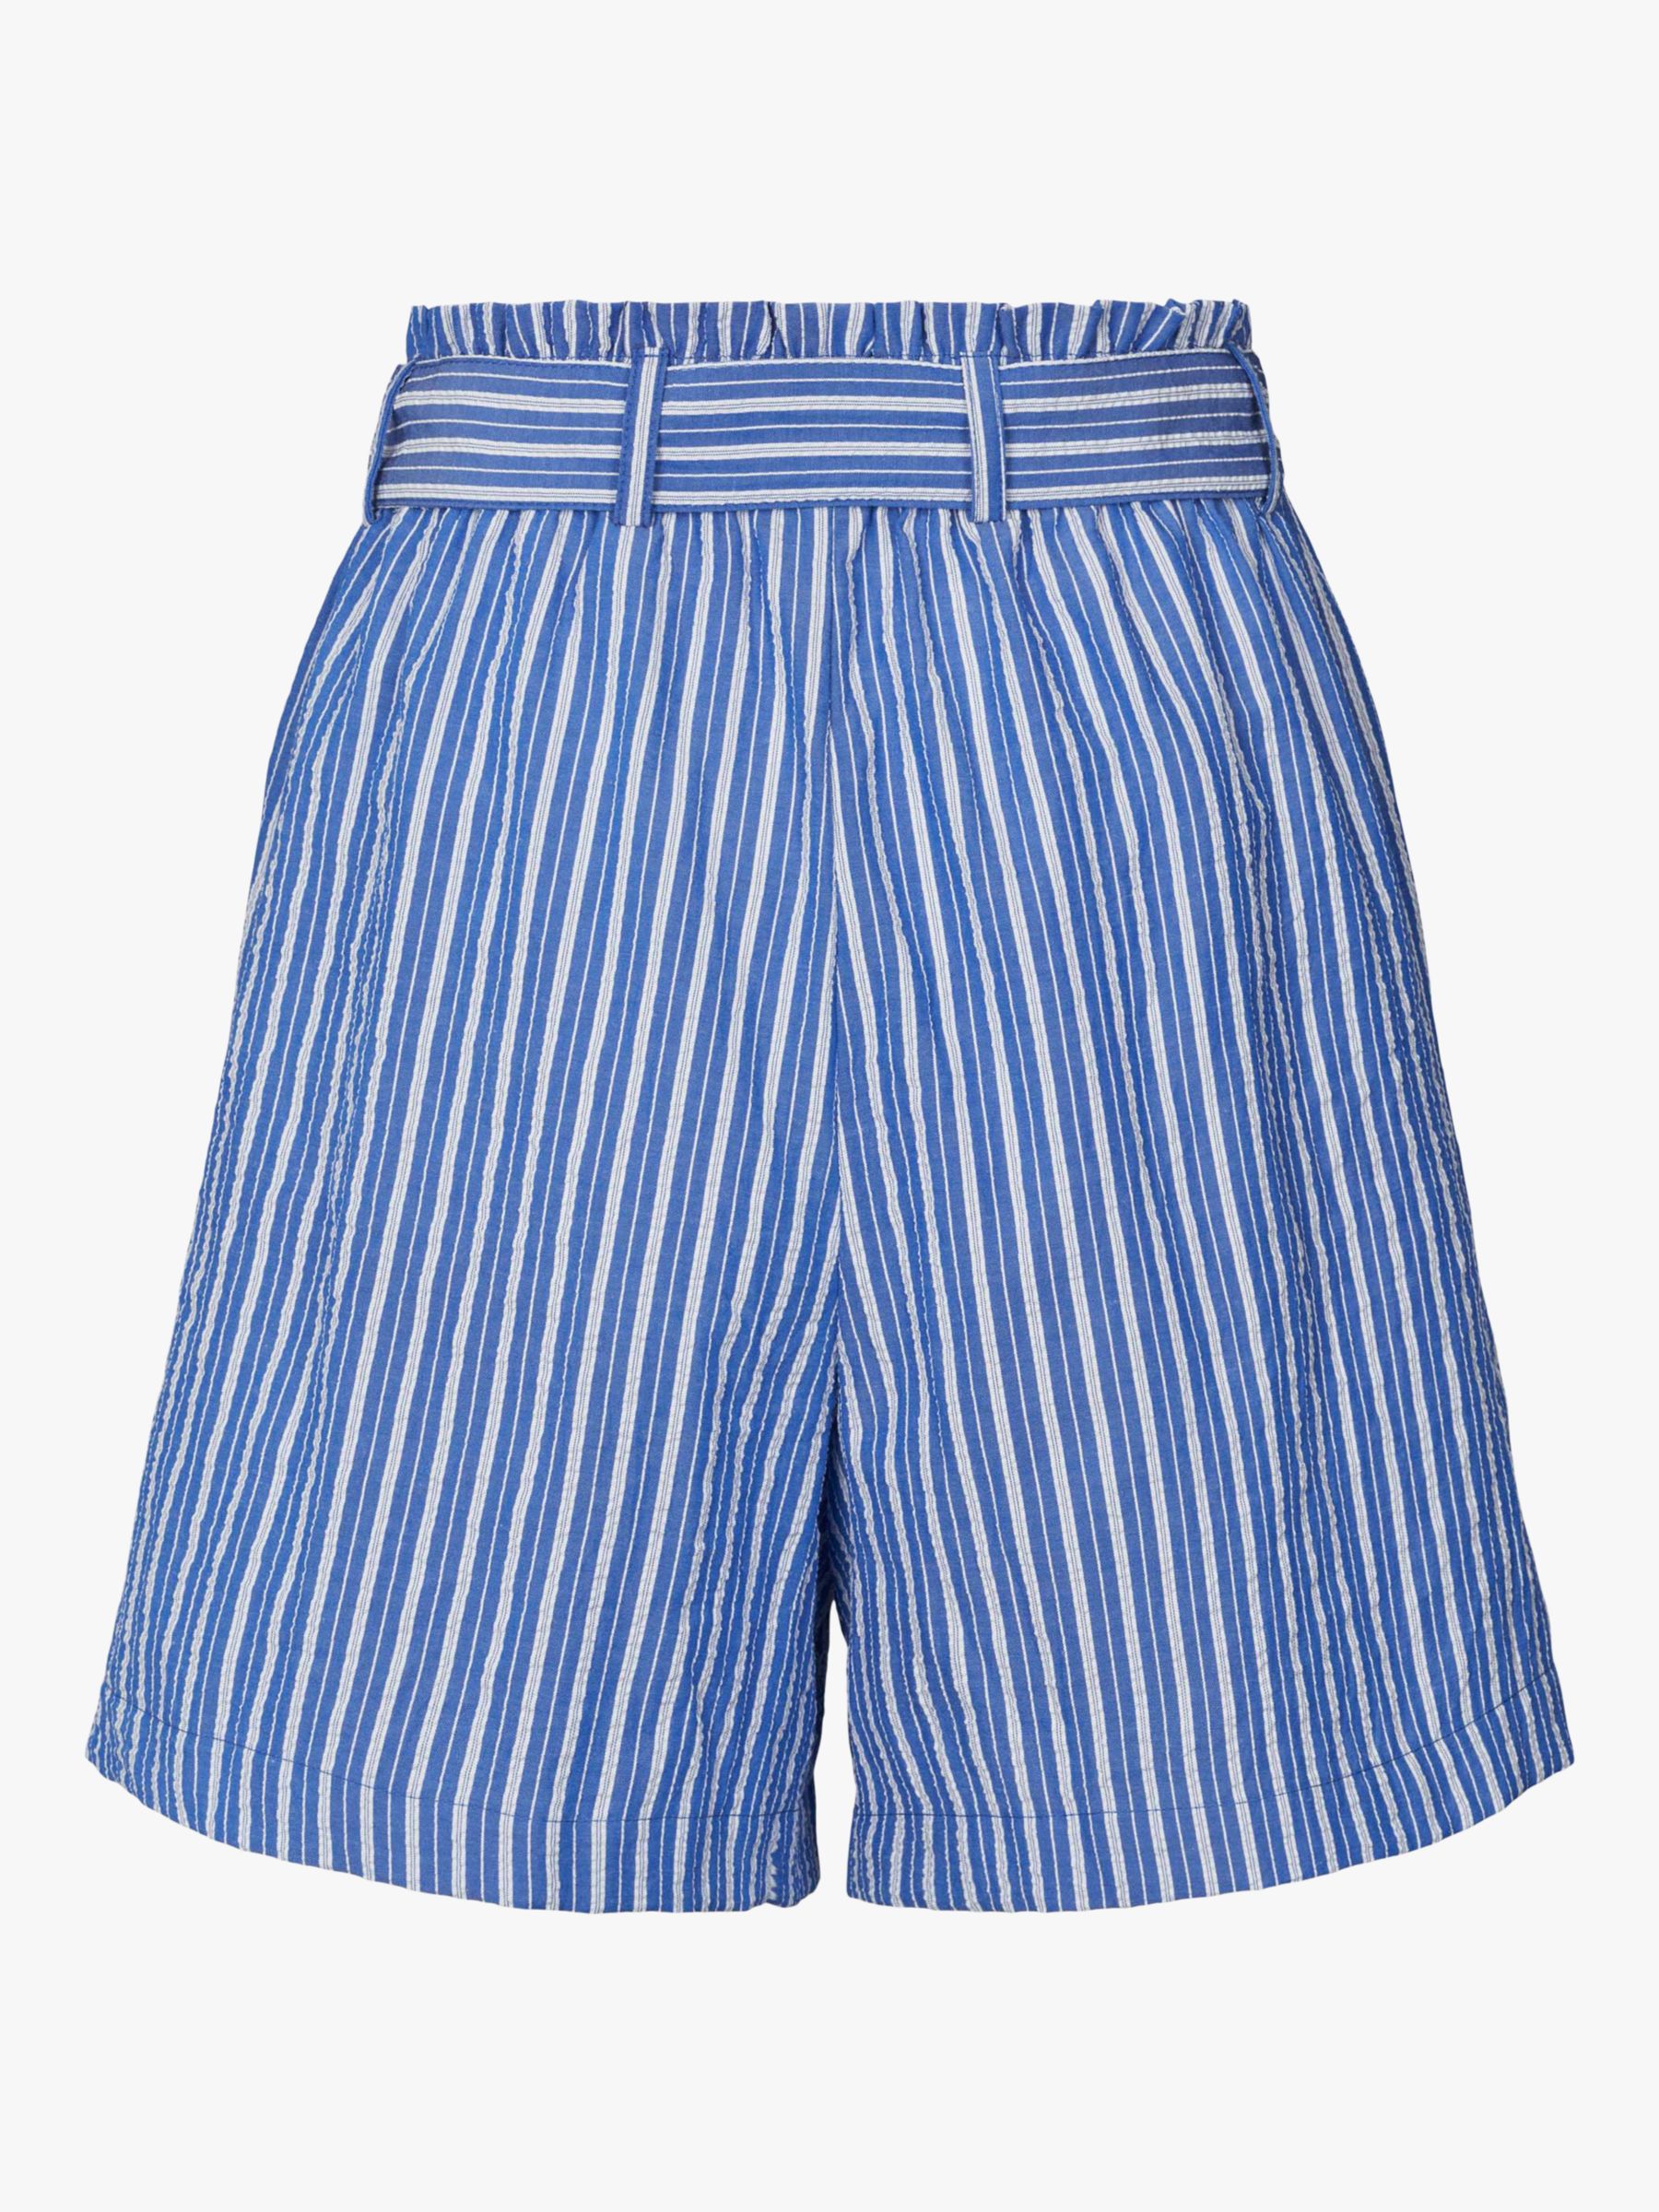 Lollys Laundry Striped Blanca Shorts, Blue, S